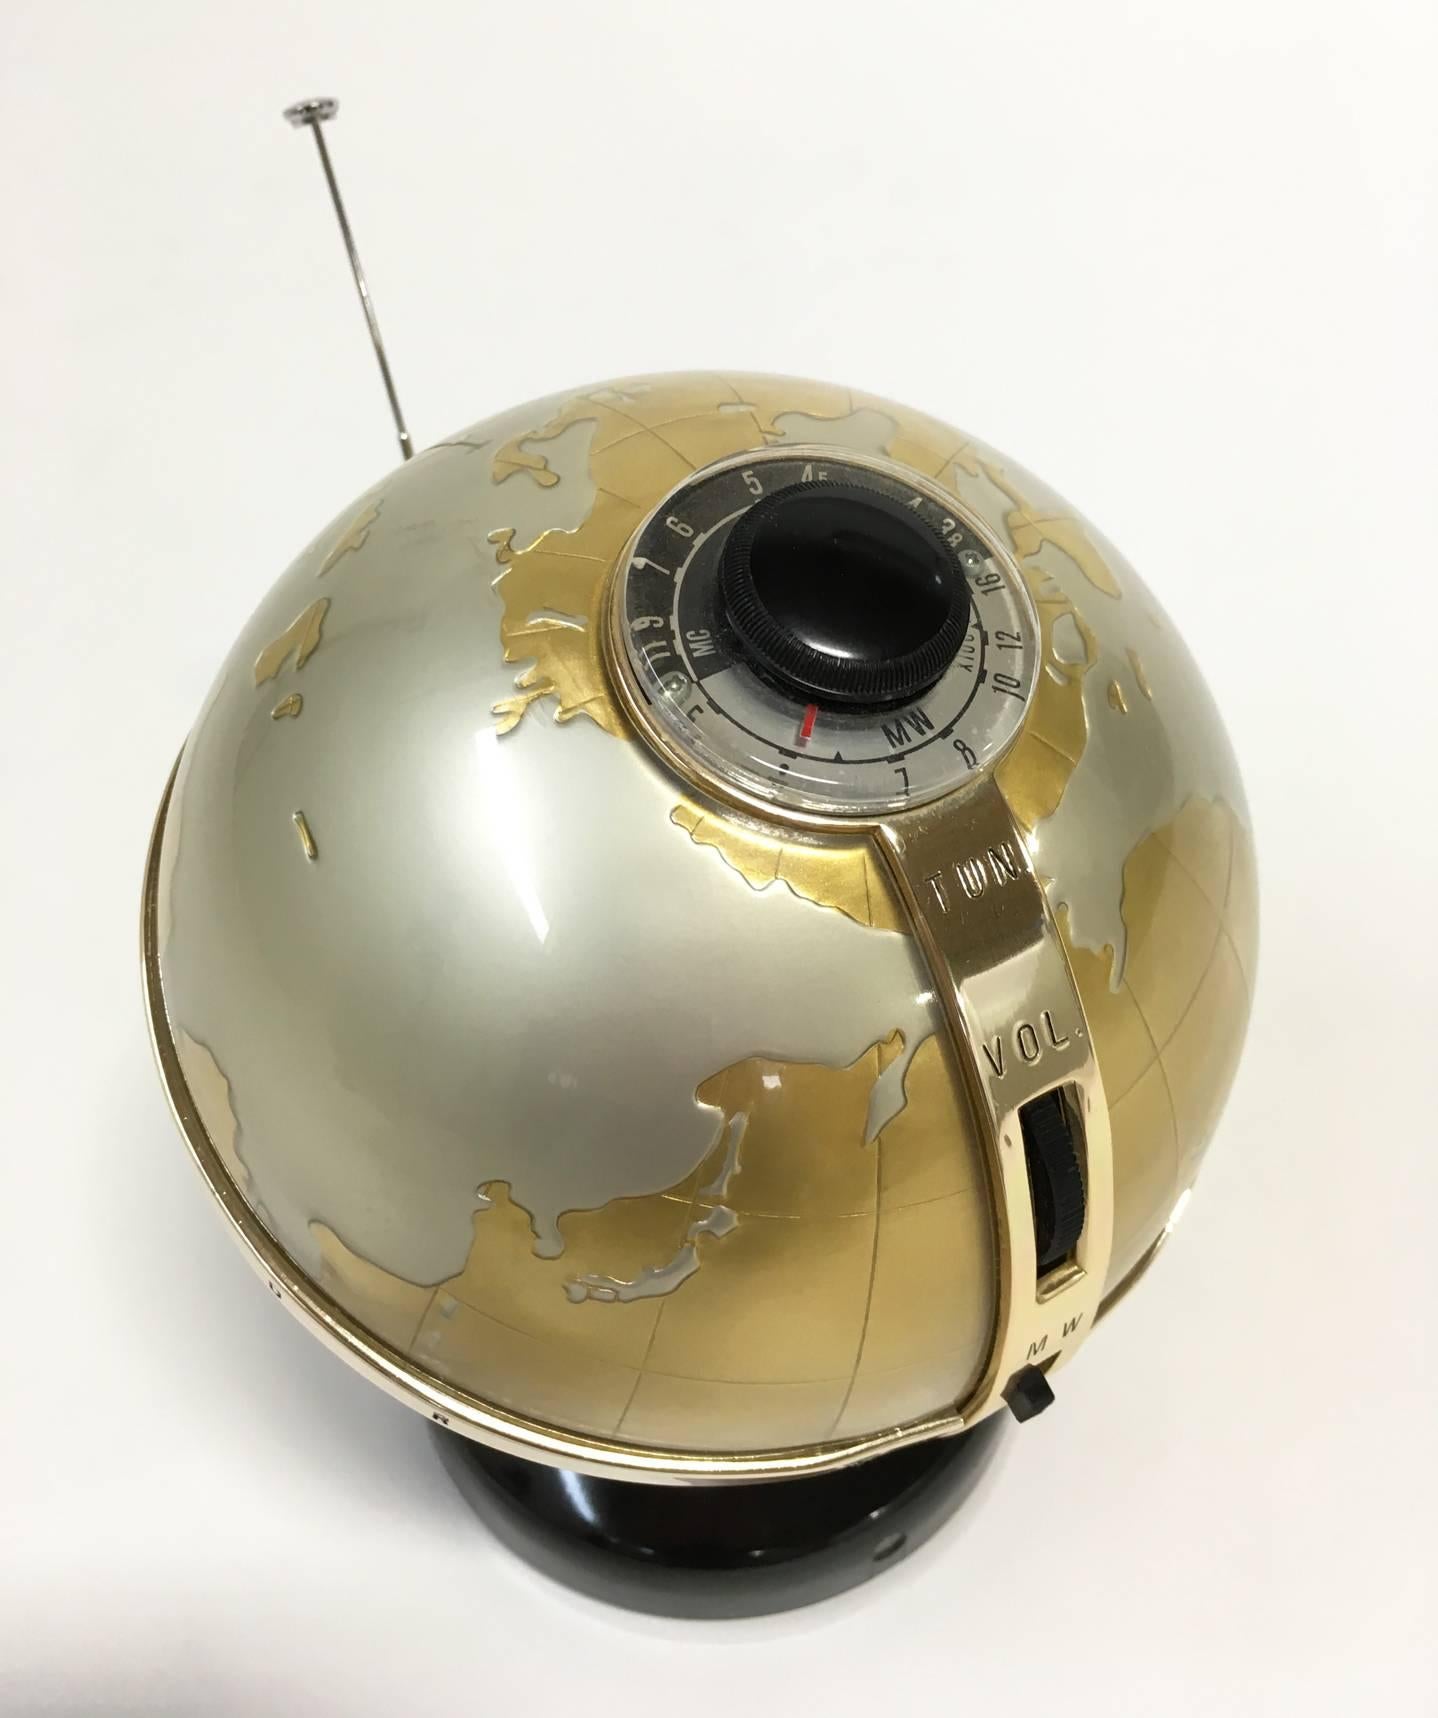 A rare vintage modern vista model NTR-6G globe transistor radio. Made in Japan, circa 1960. The tuner control dial is on the top of the globe, at the north pole. Connected is the metal band that extends south and includes controls for on/off,